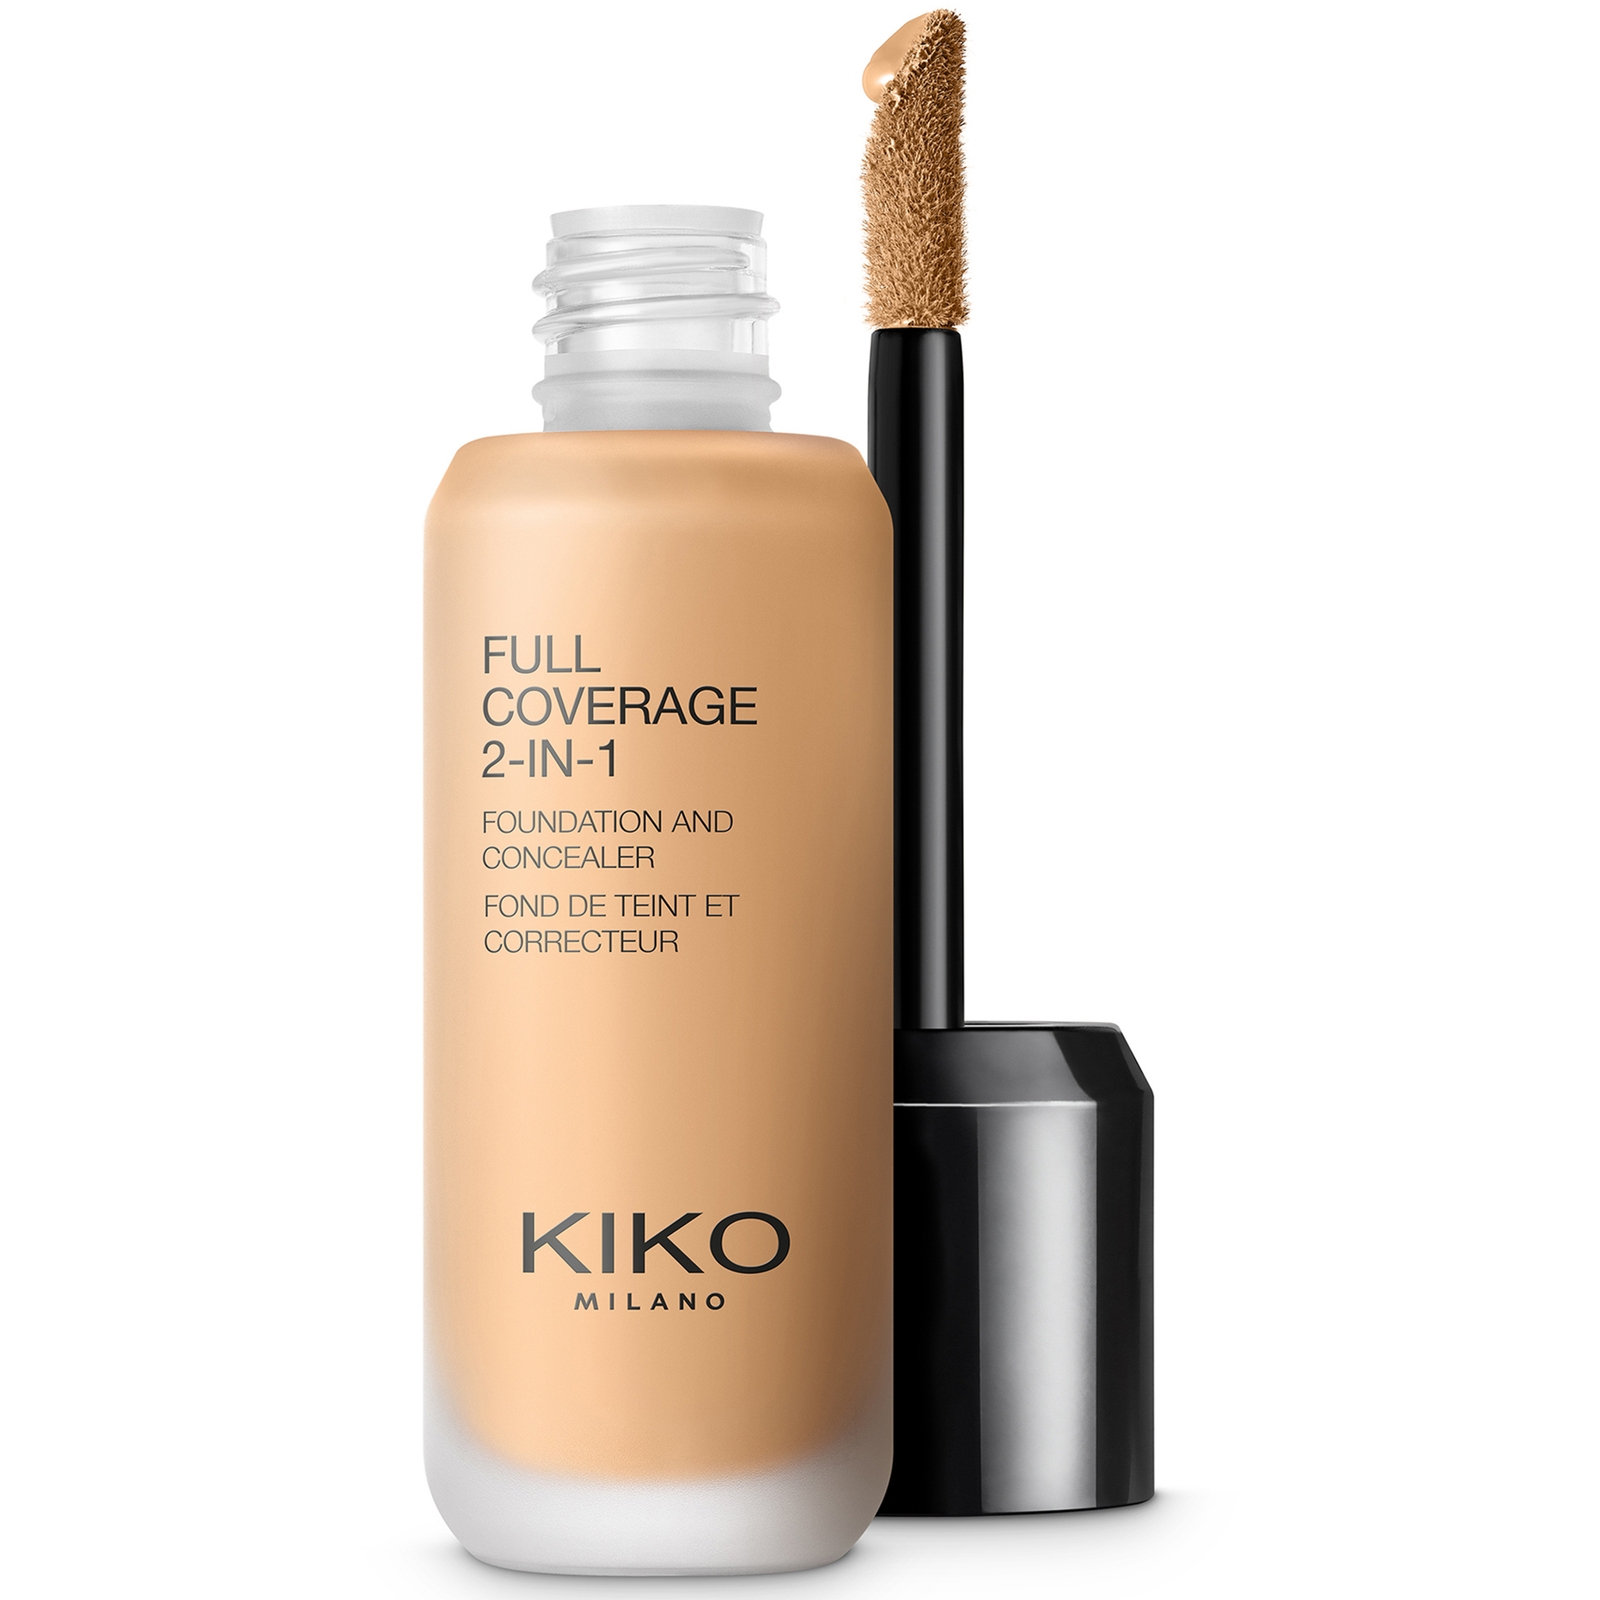 KIKO Milano Full Coverage 2-in-1 Foundation and Concealer 25ml (Various Shades) - 50 Olive